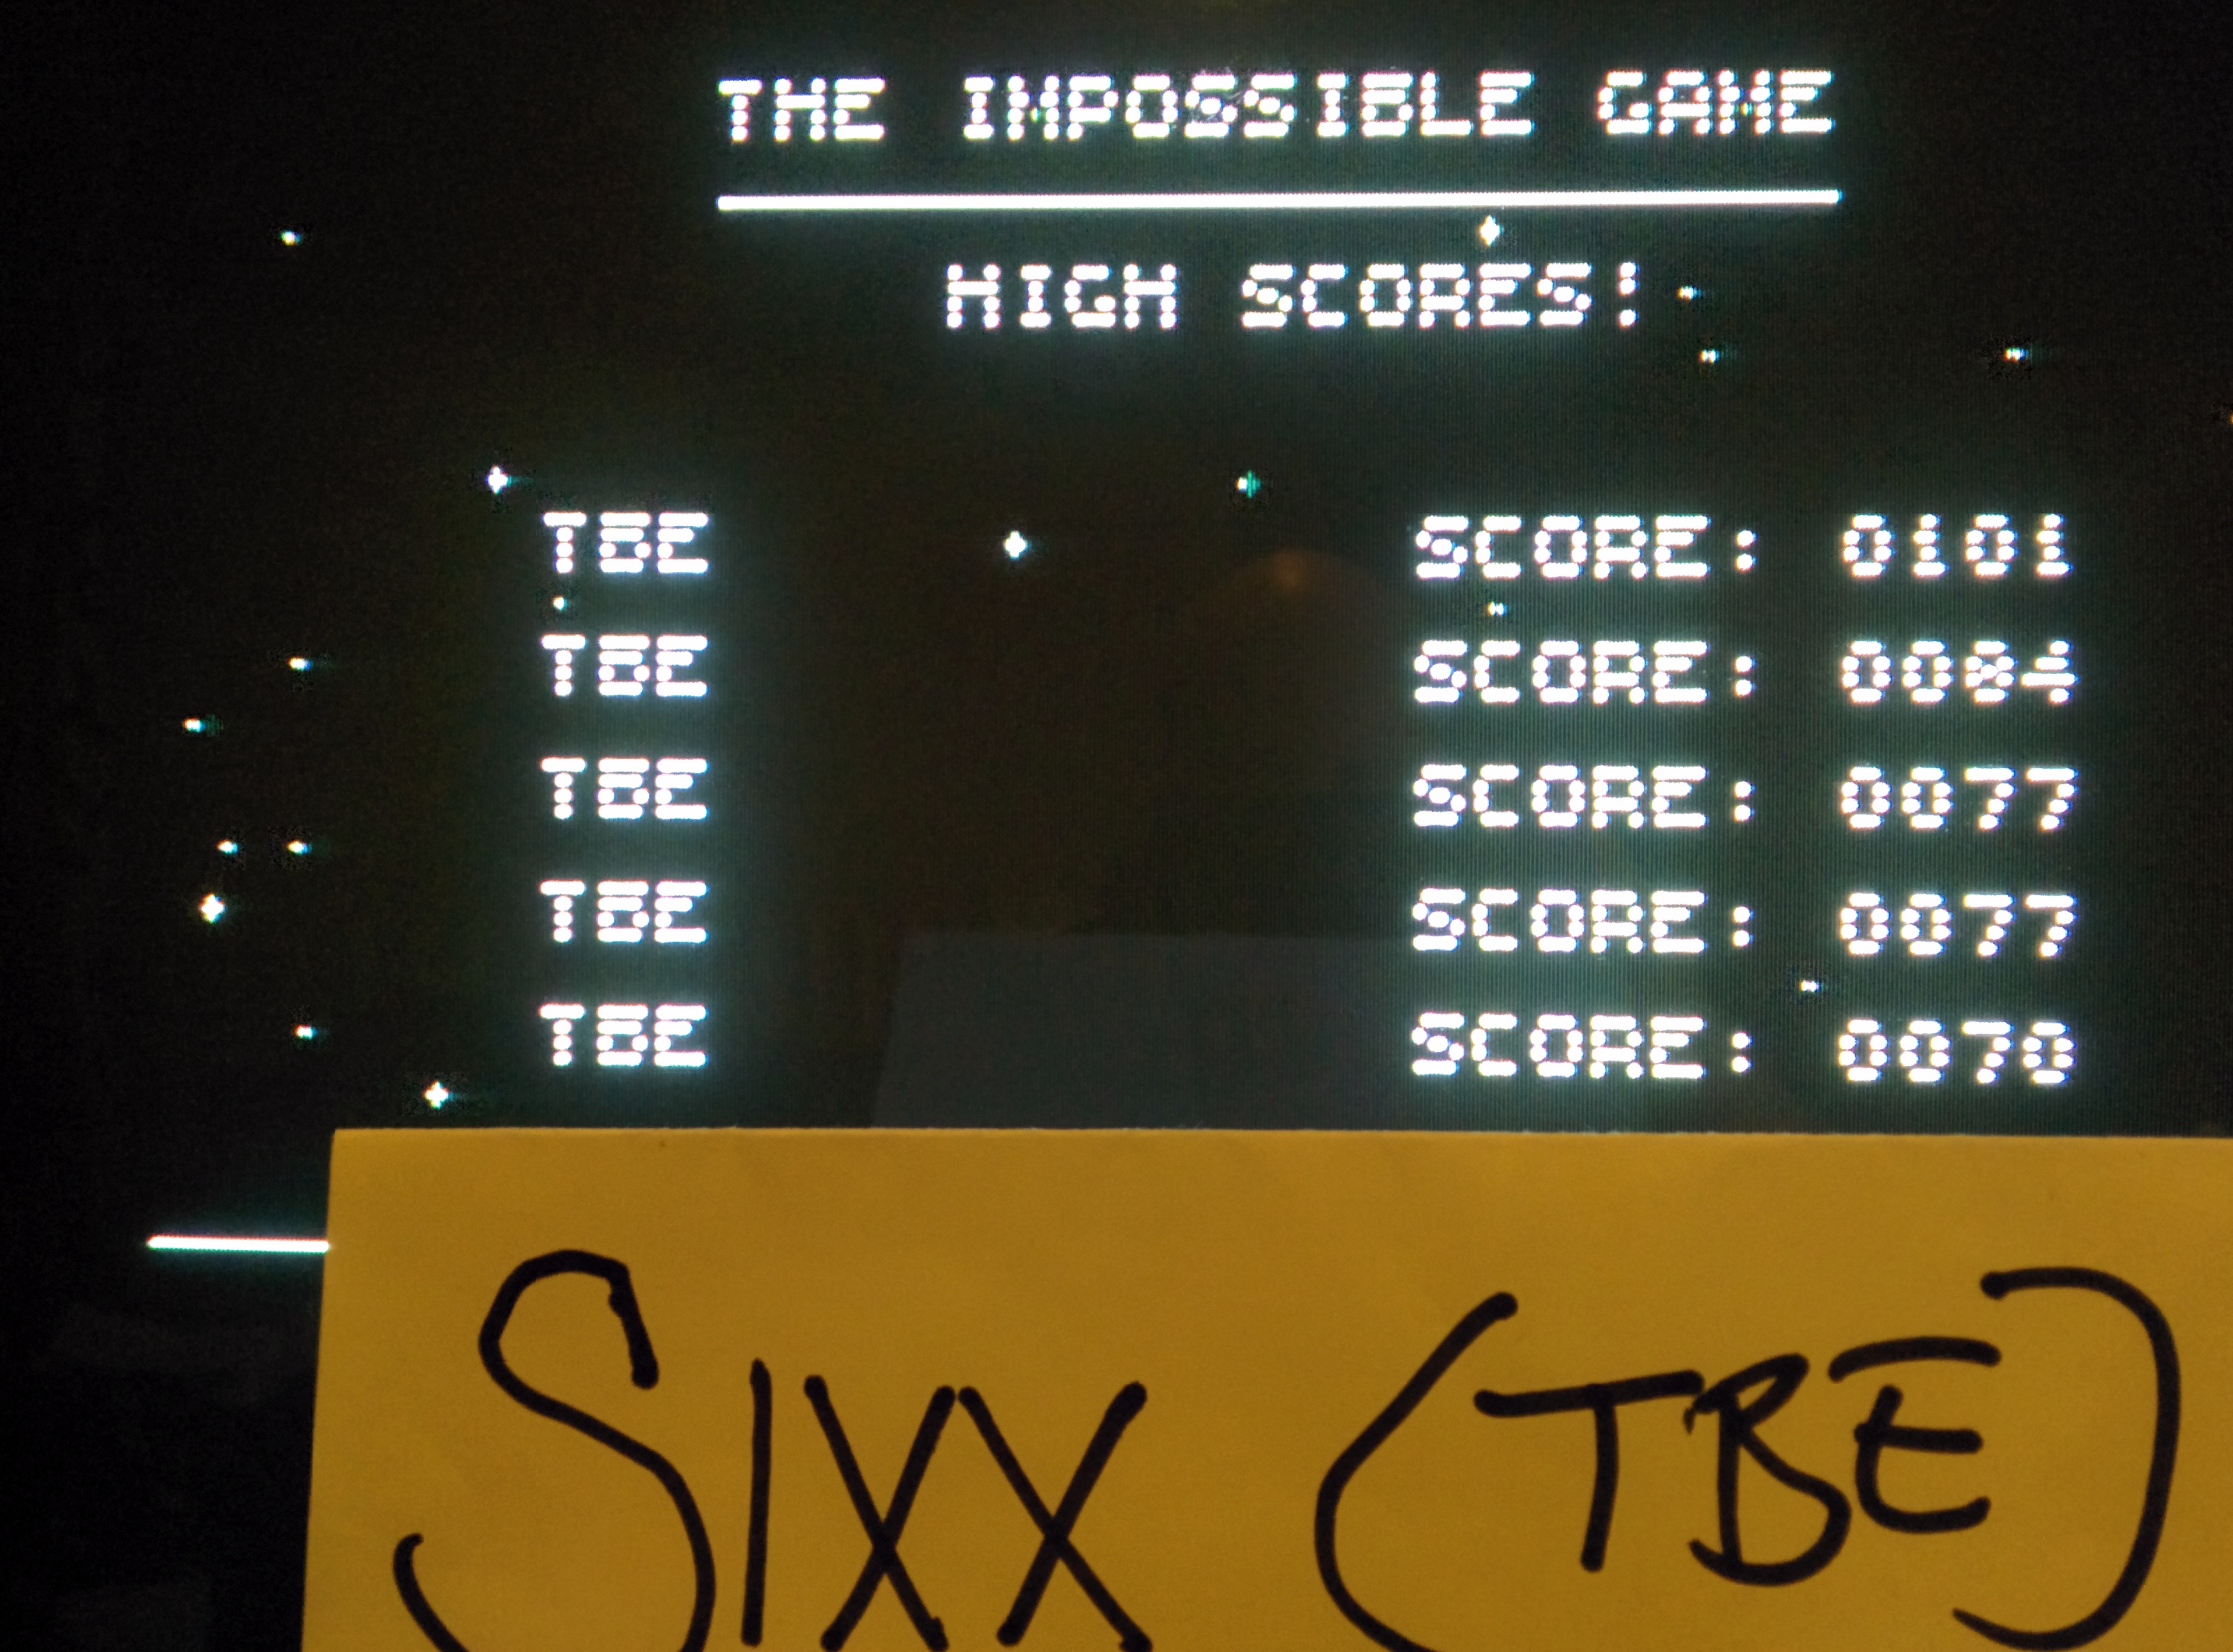 Sixx: The Impossible Game (Commodore 64) 101 points on 2014-05-08 17:03:24